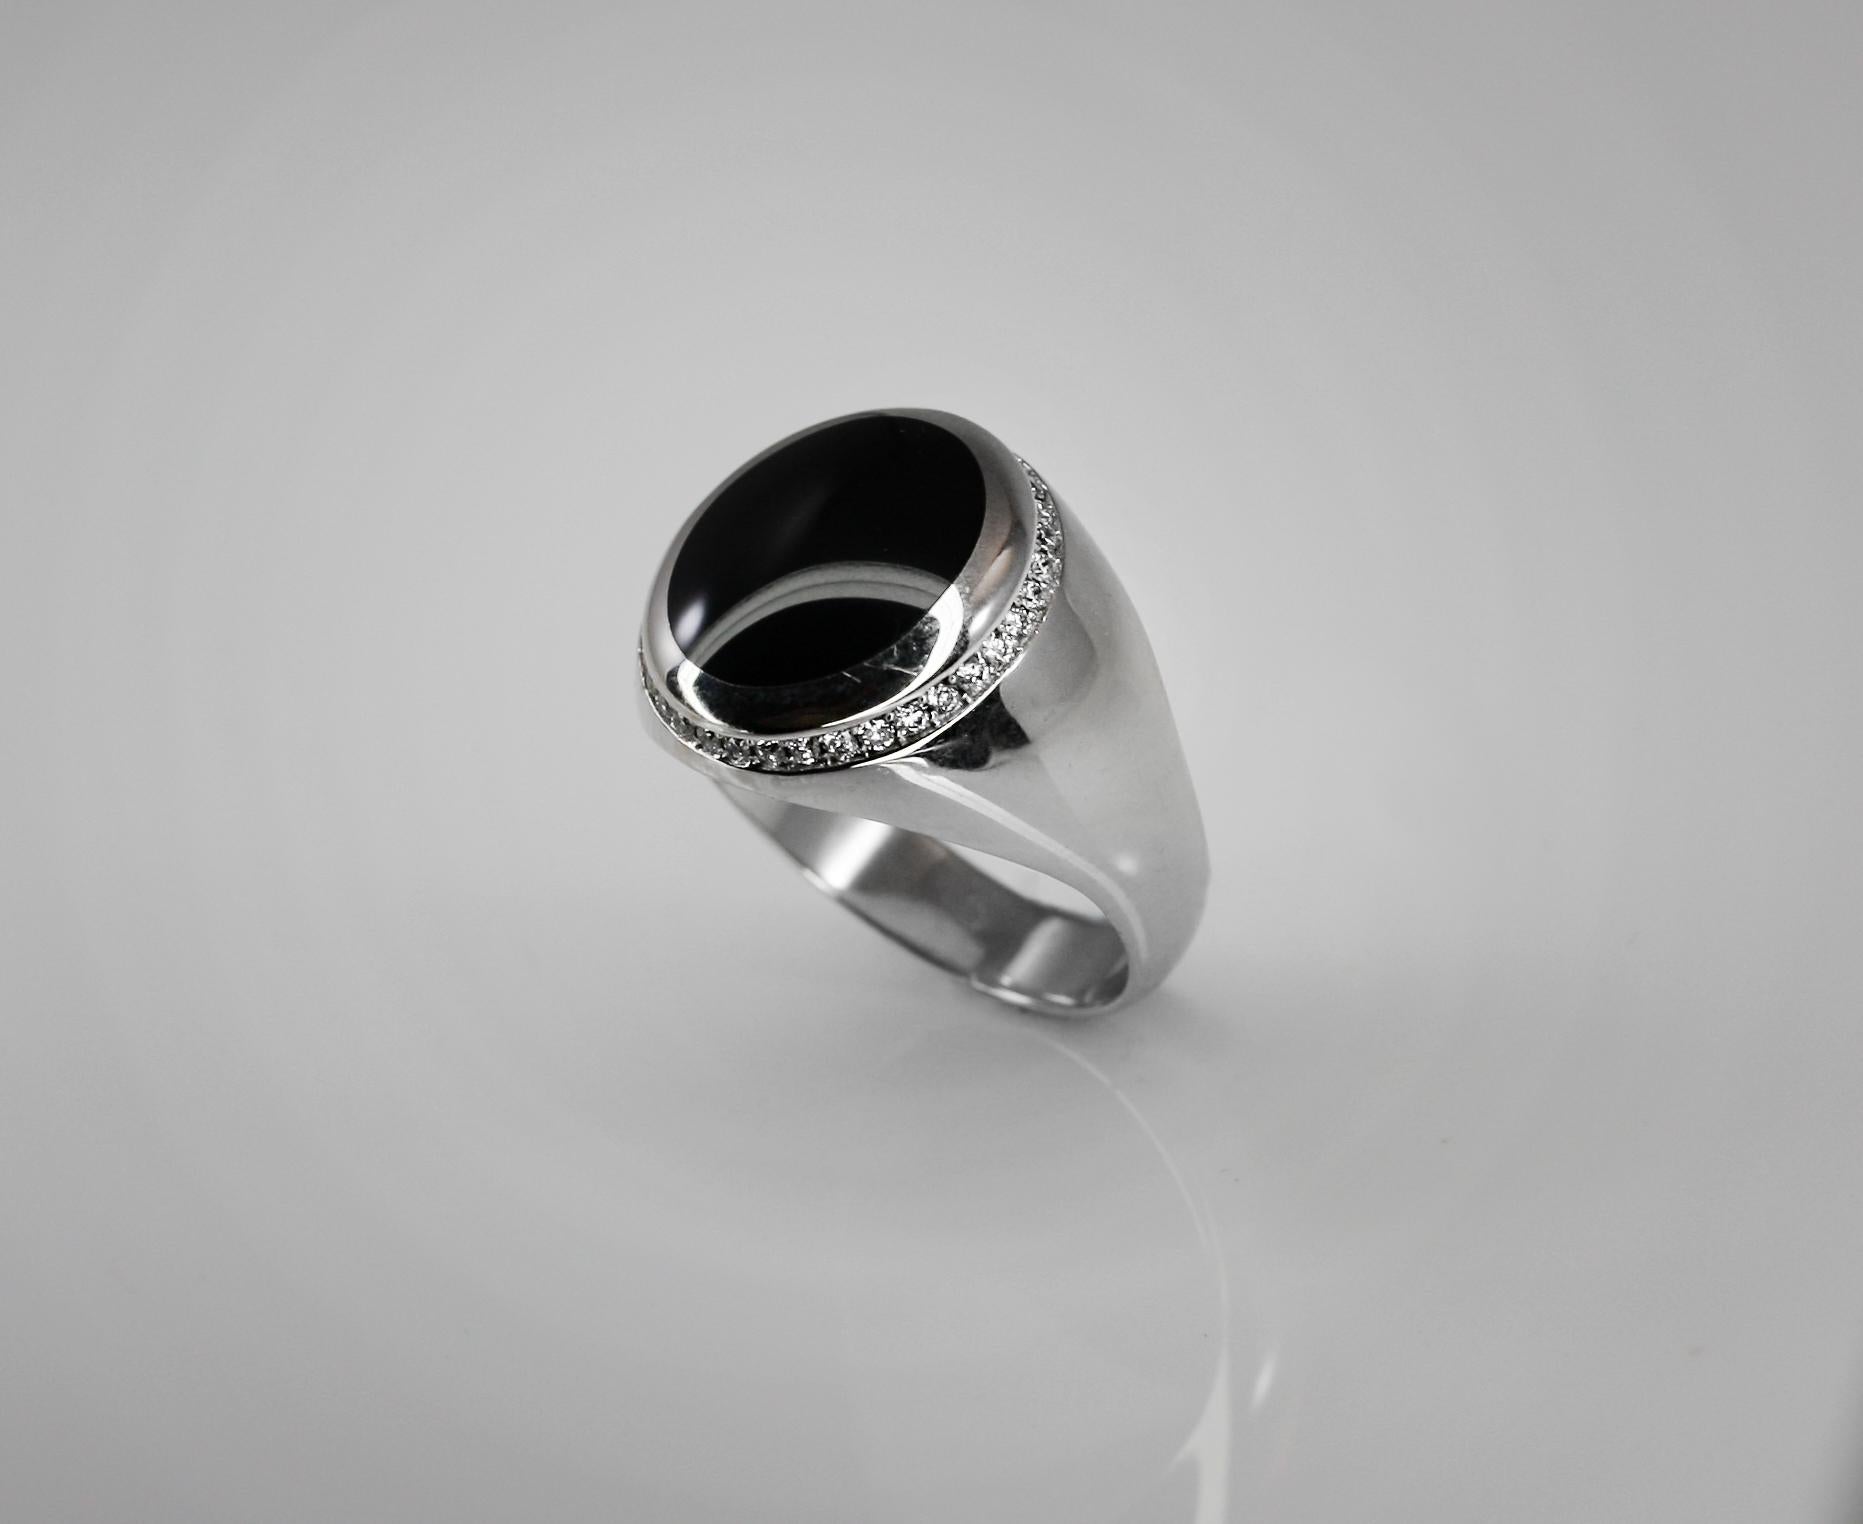 S.Georgios designer Men's Ring in White Gold 18 Karat is all hand-made and features a stunning natural Black Onyx surrounded by a bezel of White Diamonds with a total weight of 0.35 Carat. This is a gorgeous and classic ring for every day and can be